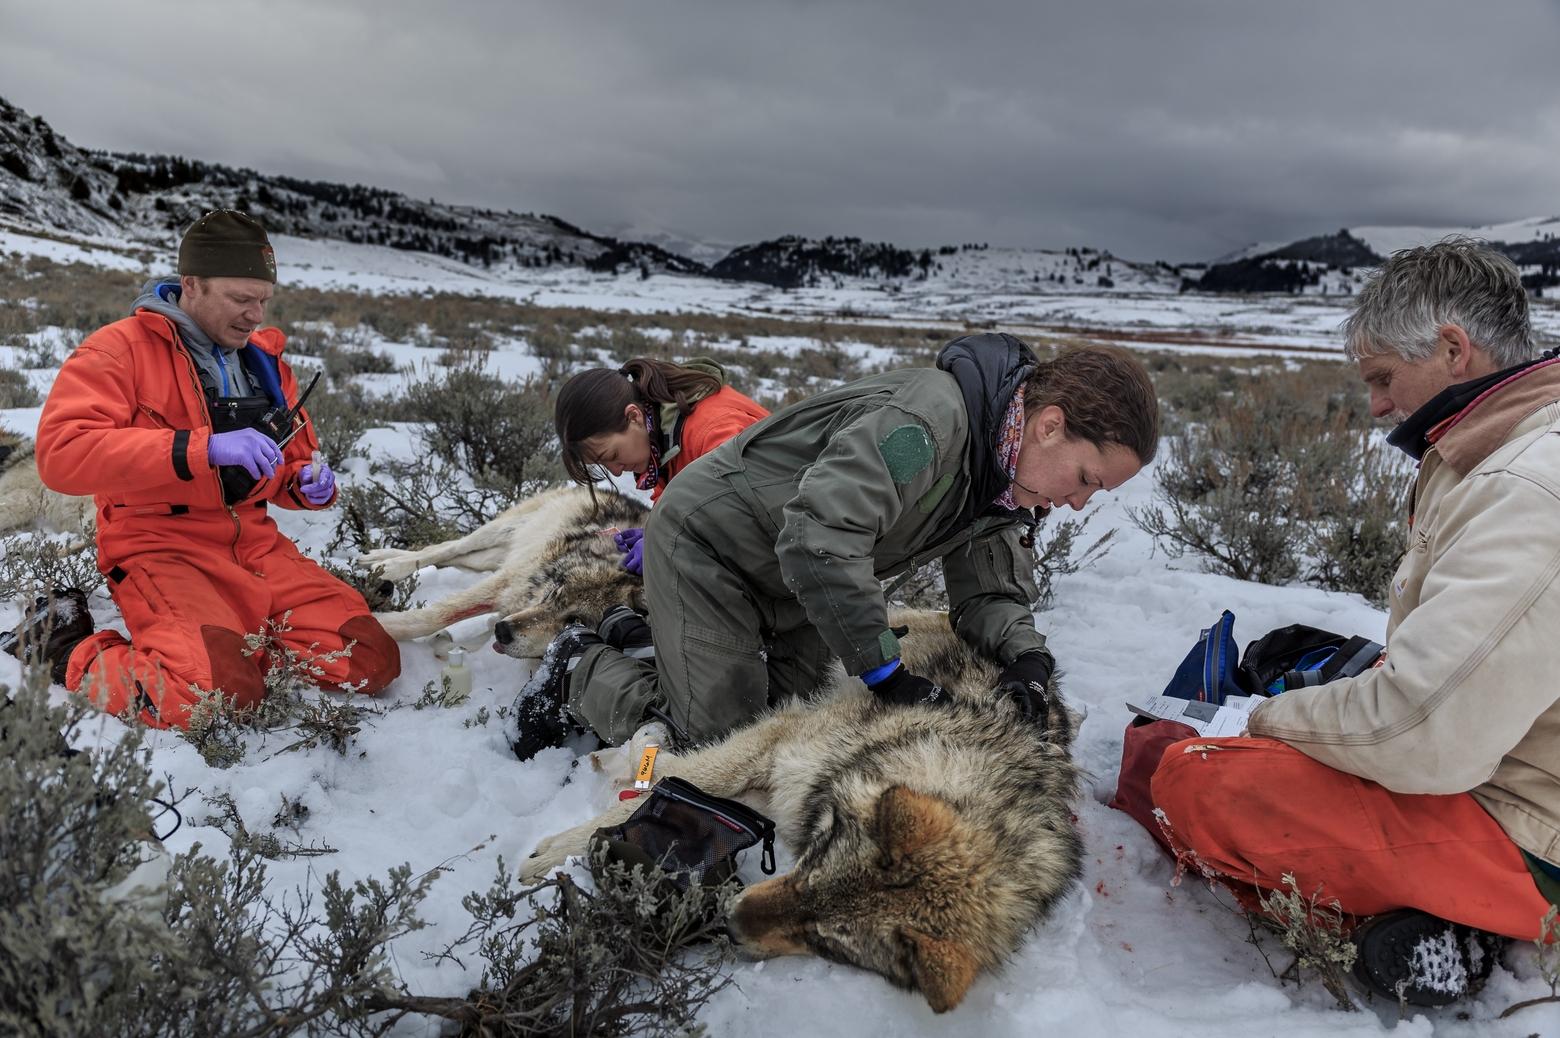 Members of the Yellowstone Wolf Project (L to R): Dan Stahler, Erin Stahler, Kira Cassidy and Doug Smith tend to sedated wolves of the Junction Butte Pack during the annual collaring operation in Yellowstone National Park on December 15, 2014. Photo by Ronan Donovan